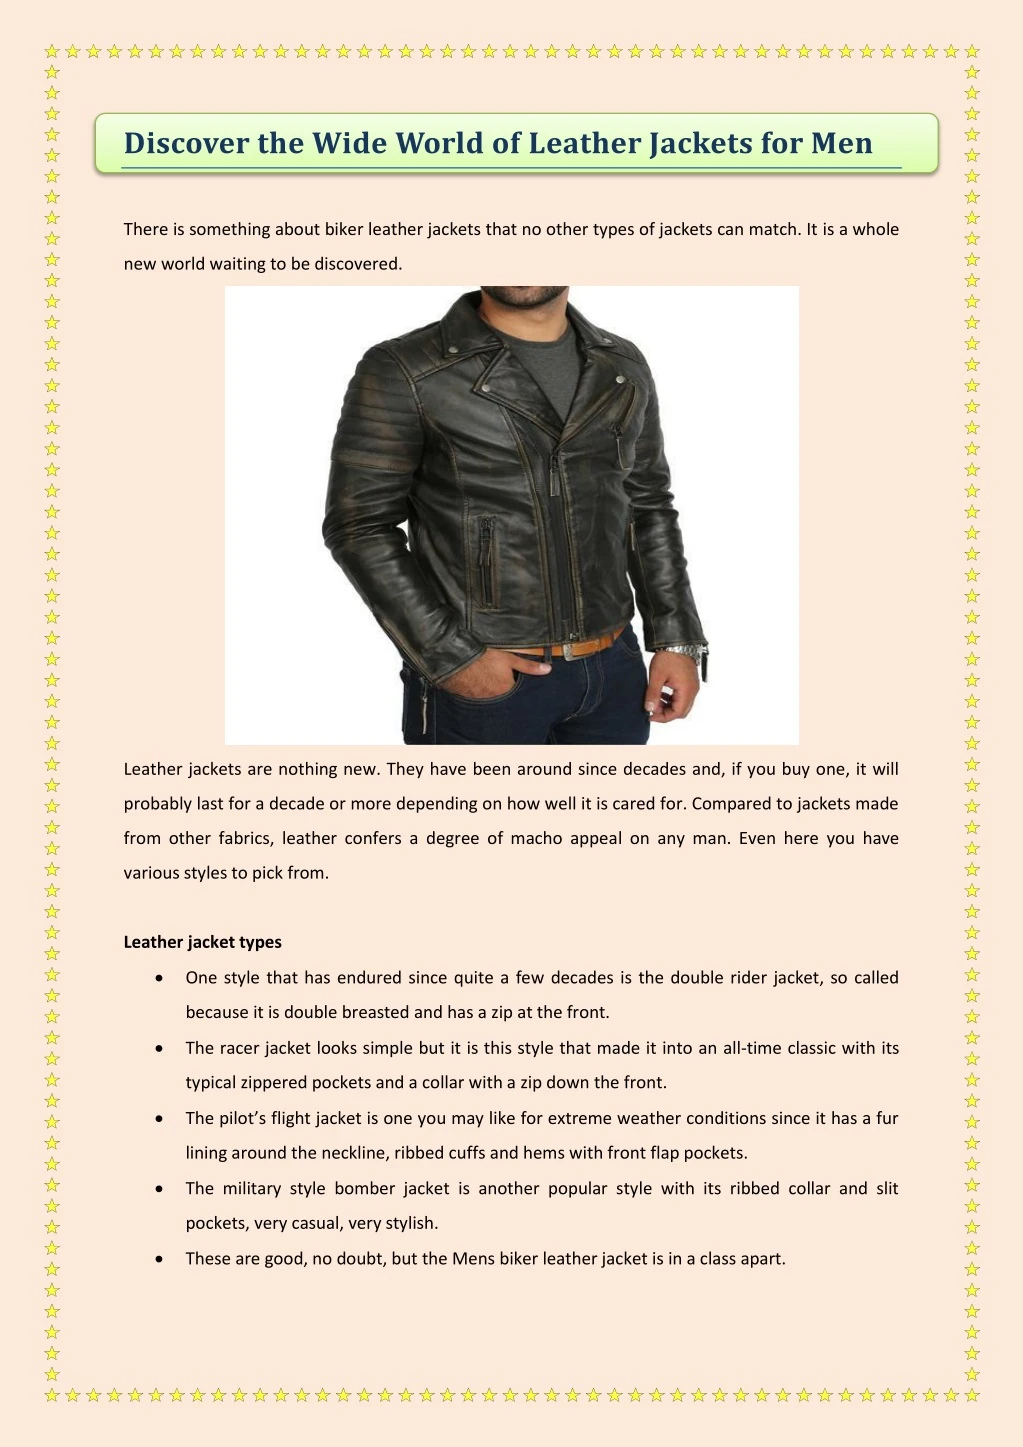 discover the wide world of leather jackets for men